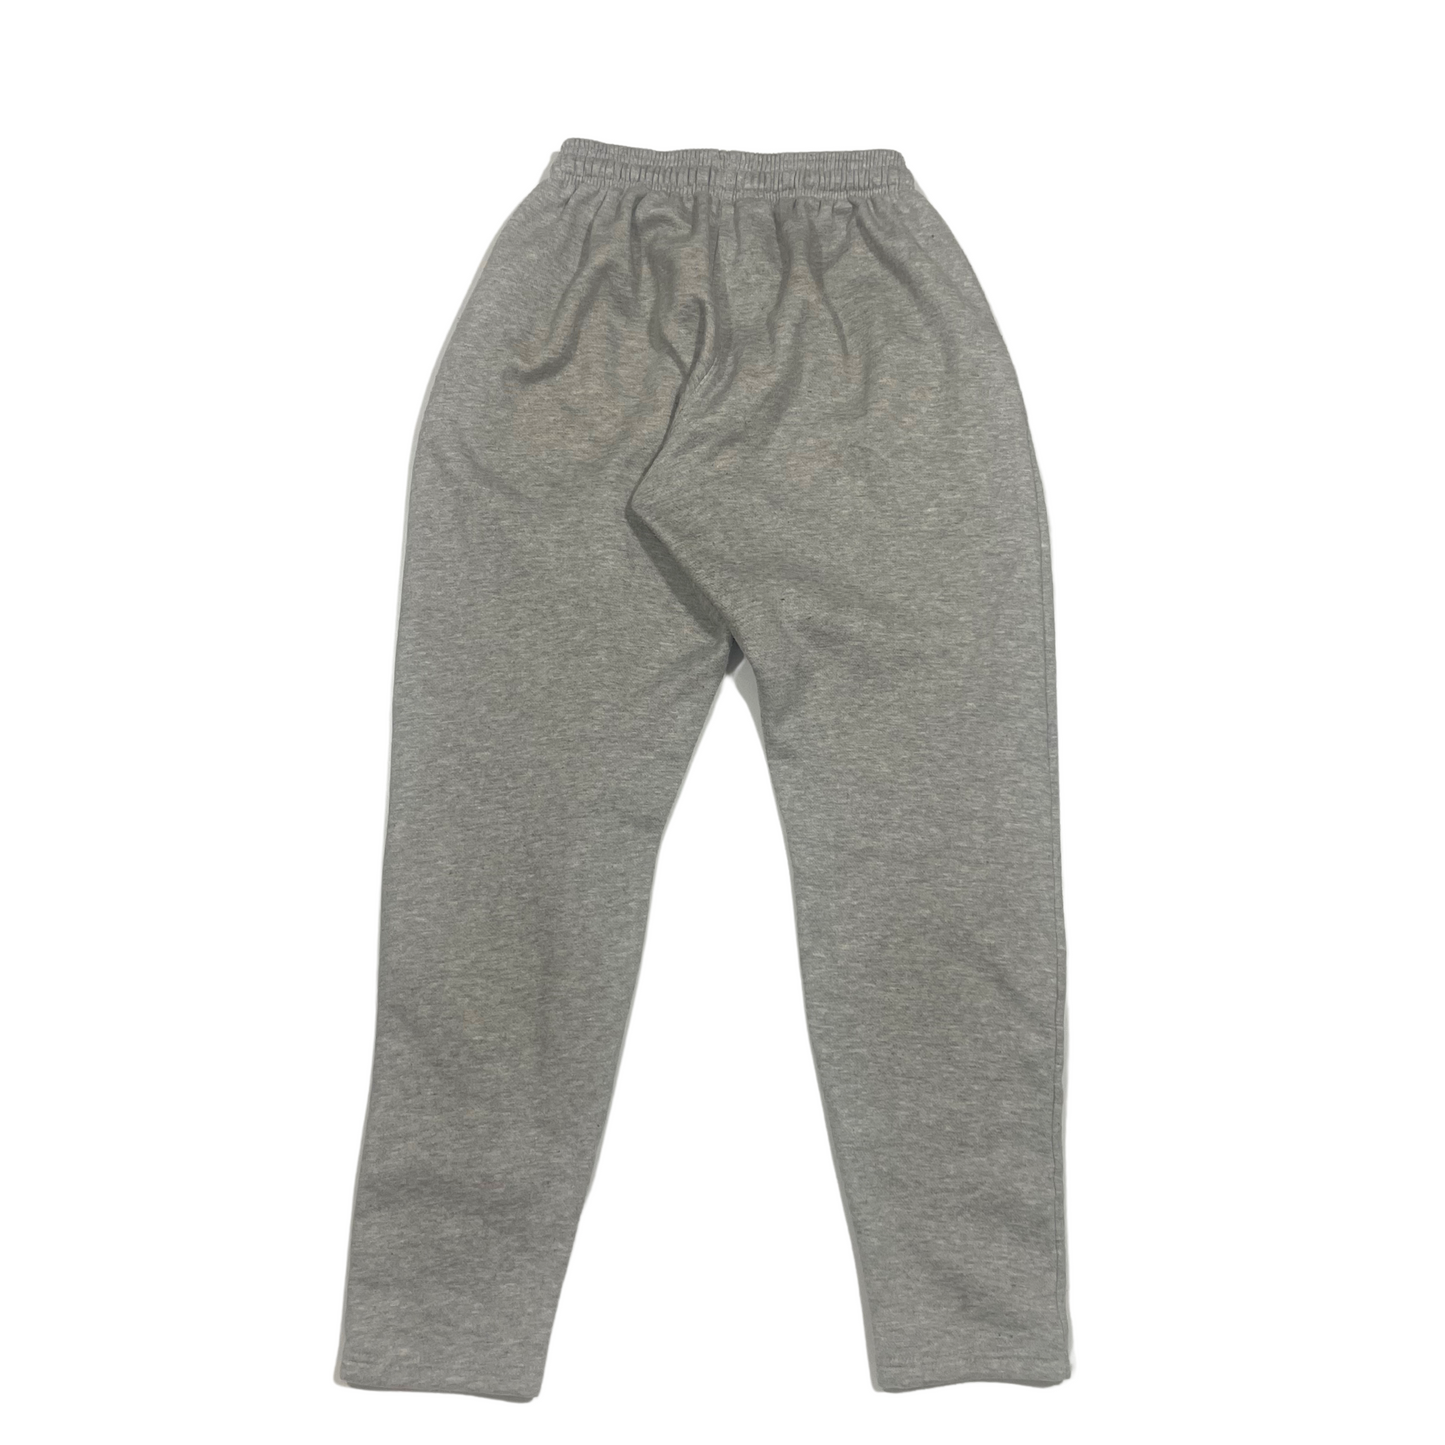 Imperial Luxe Sweatpant (Grey)